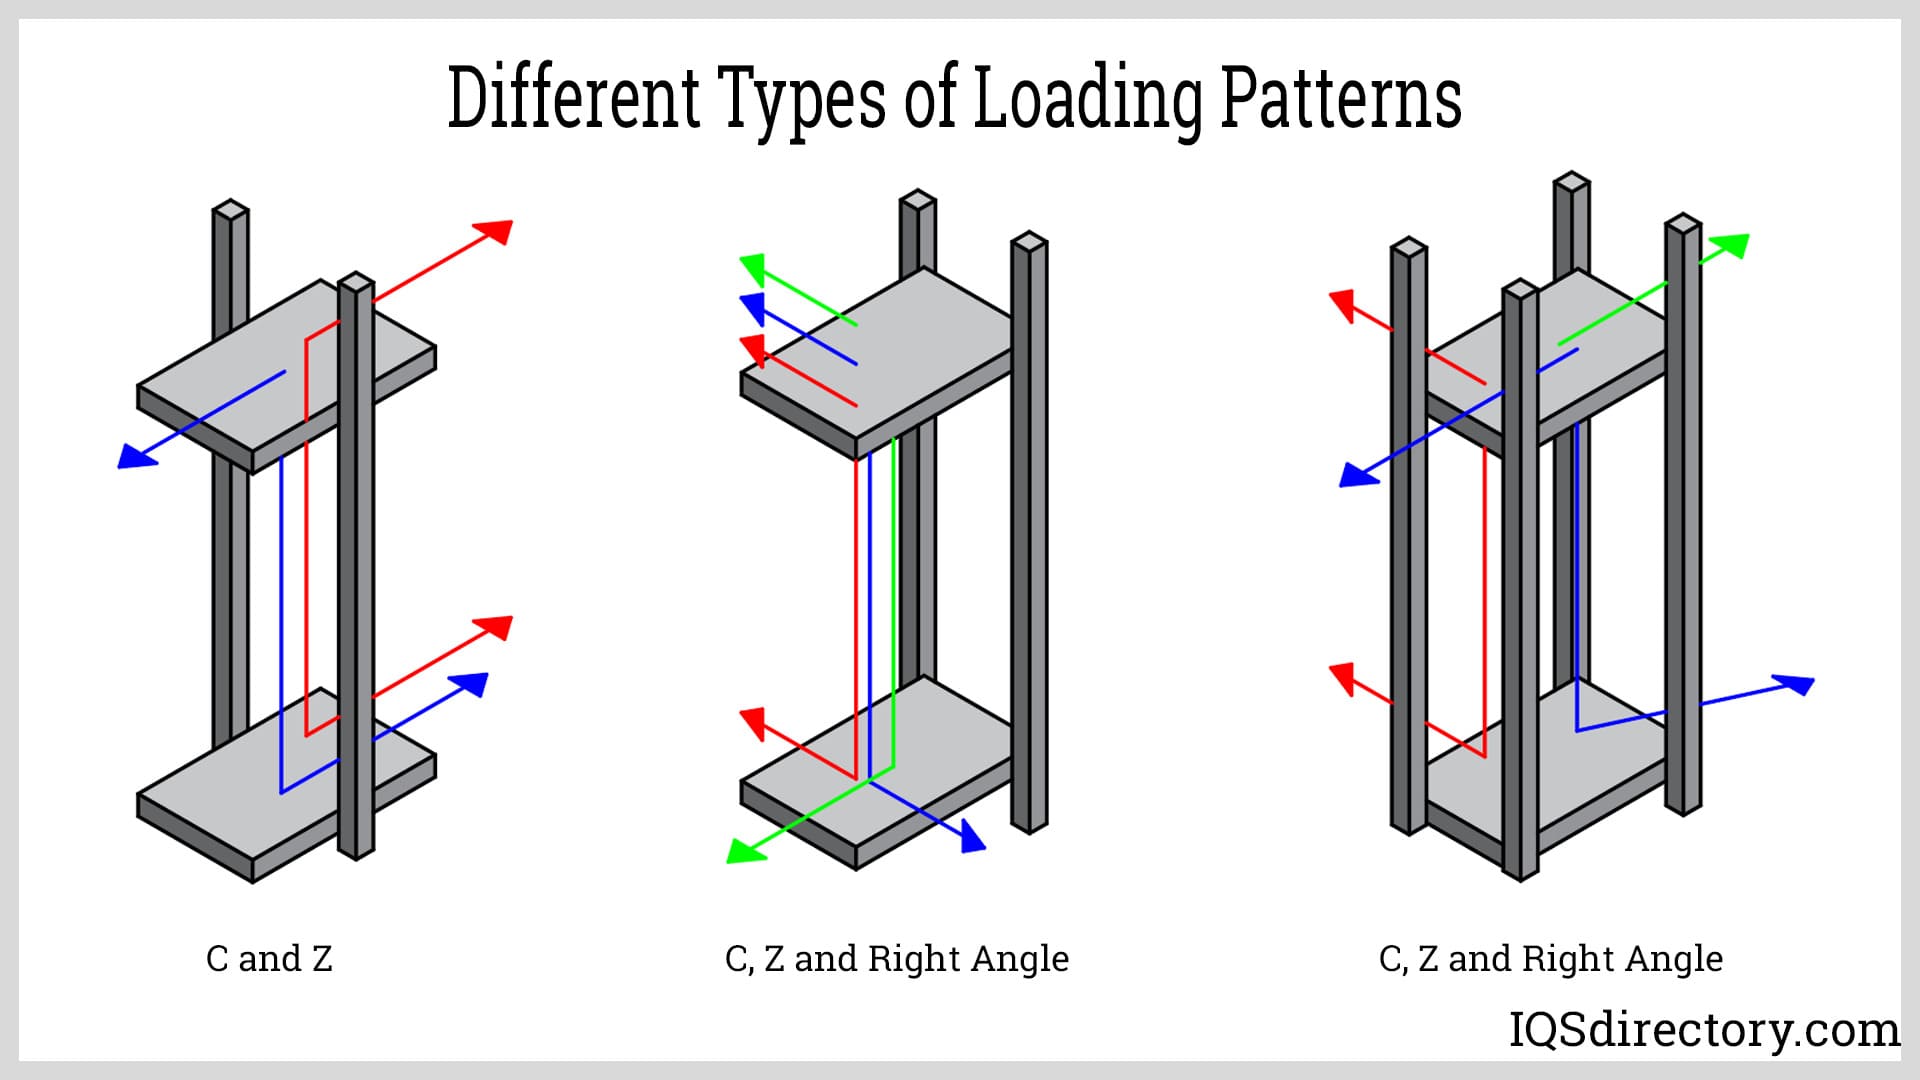 Different Types of Loading Patterns